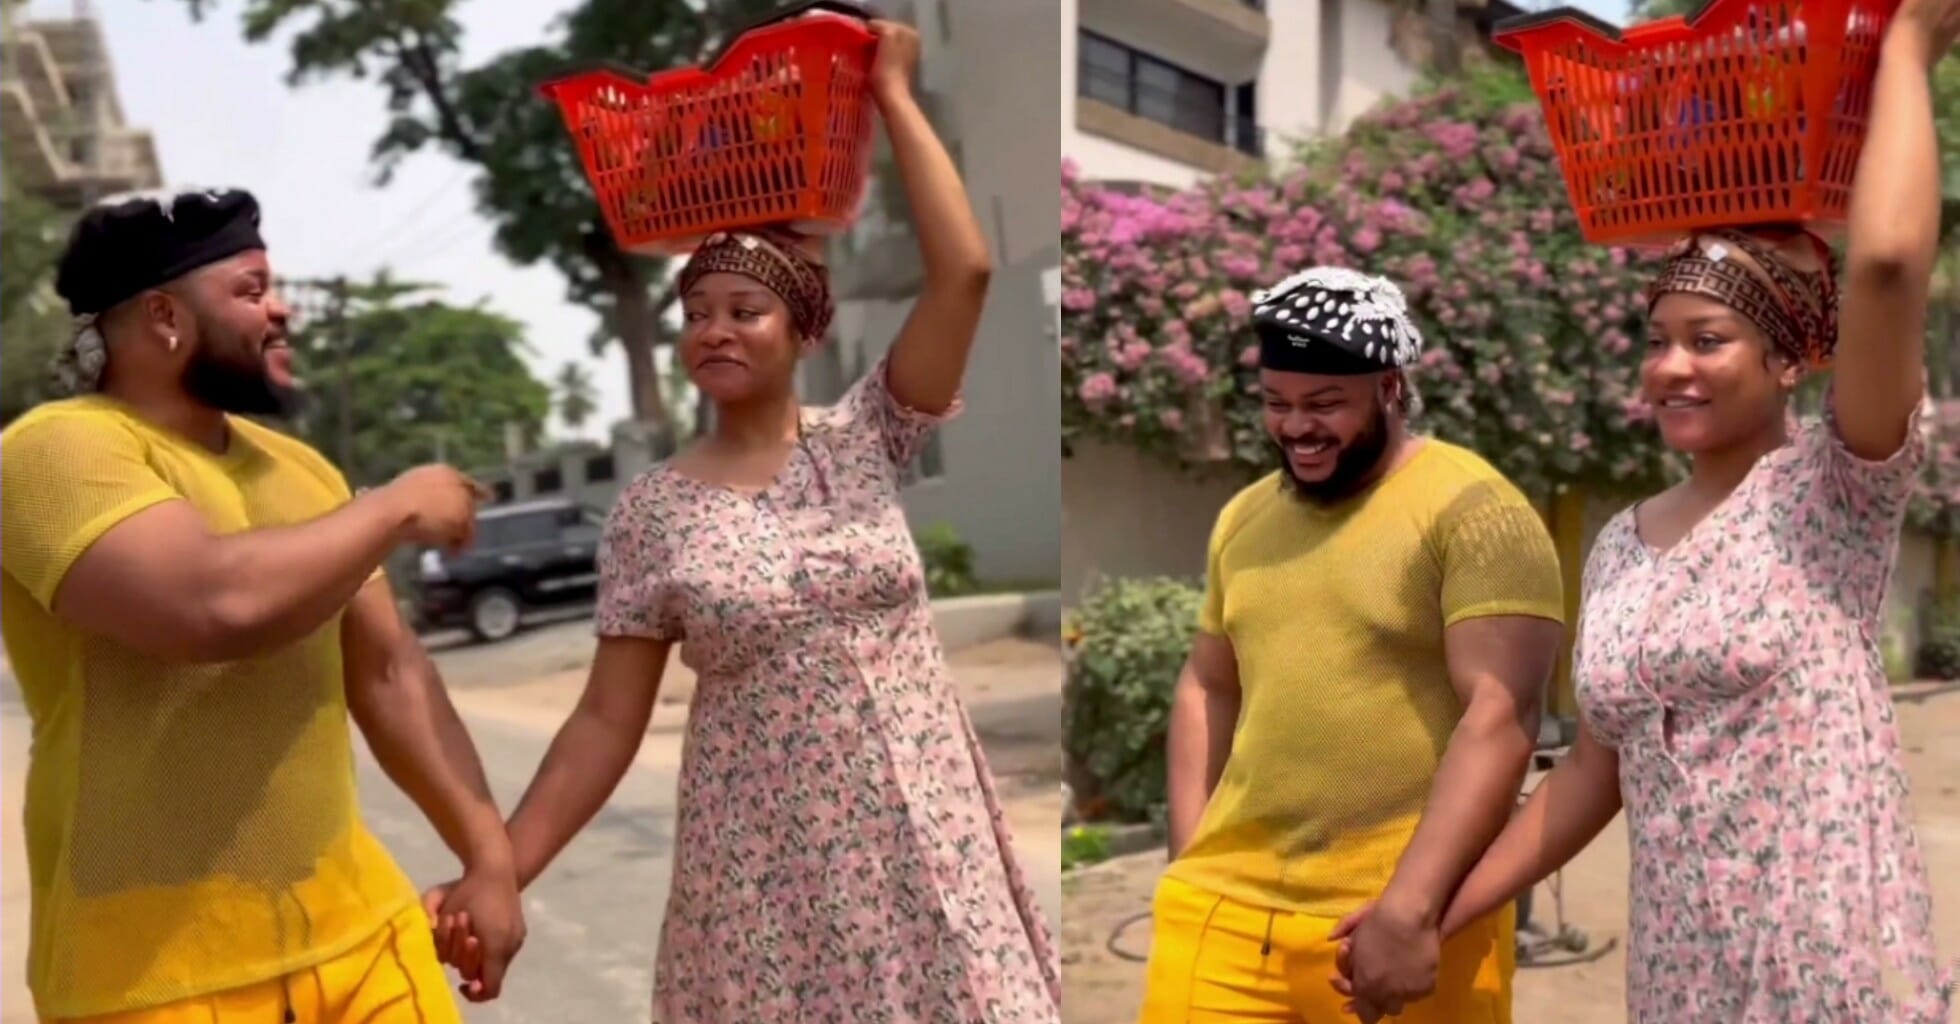 “They look good together” – Fans gush over viral video of Phyna and WhiteMoney playing lovers’ role